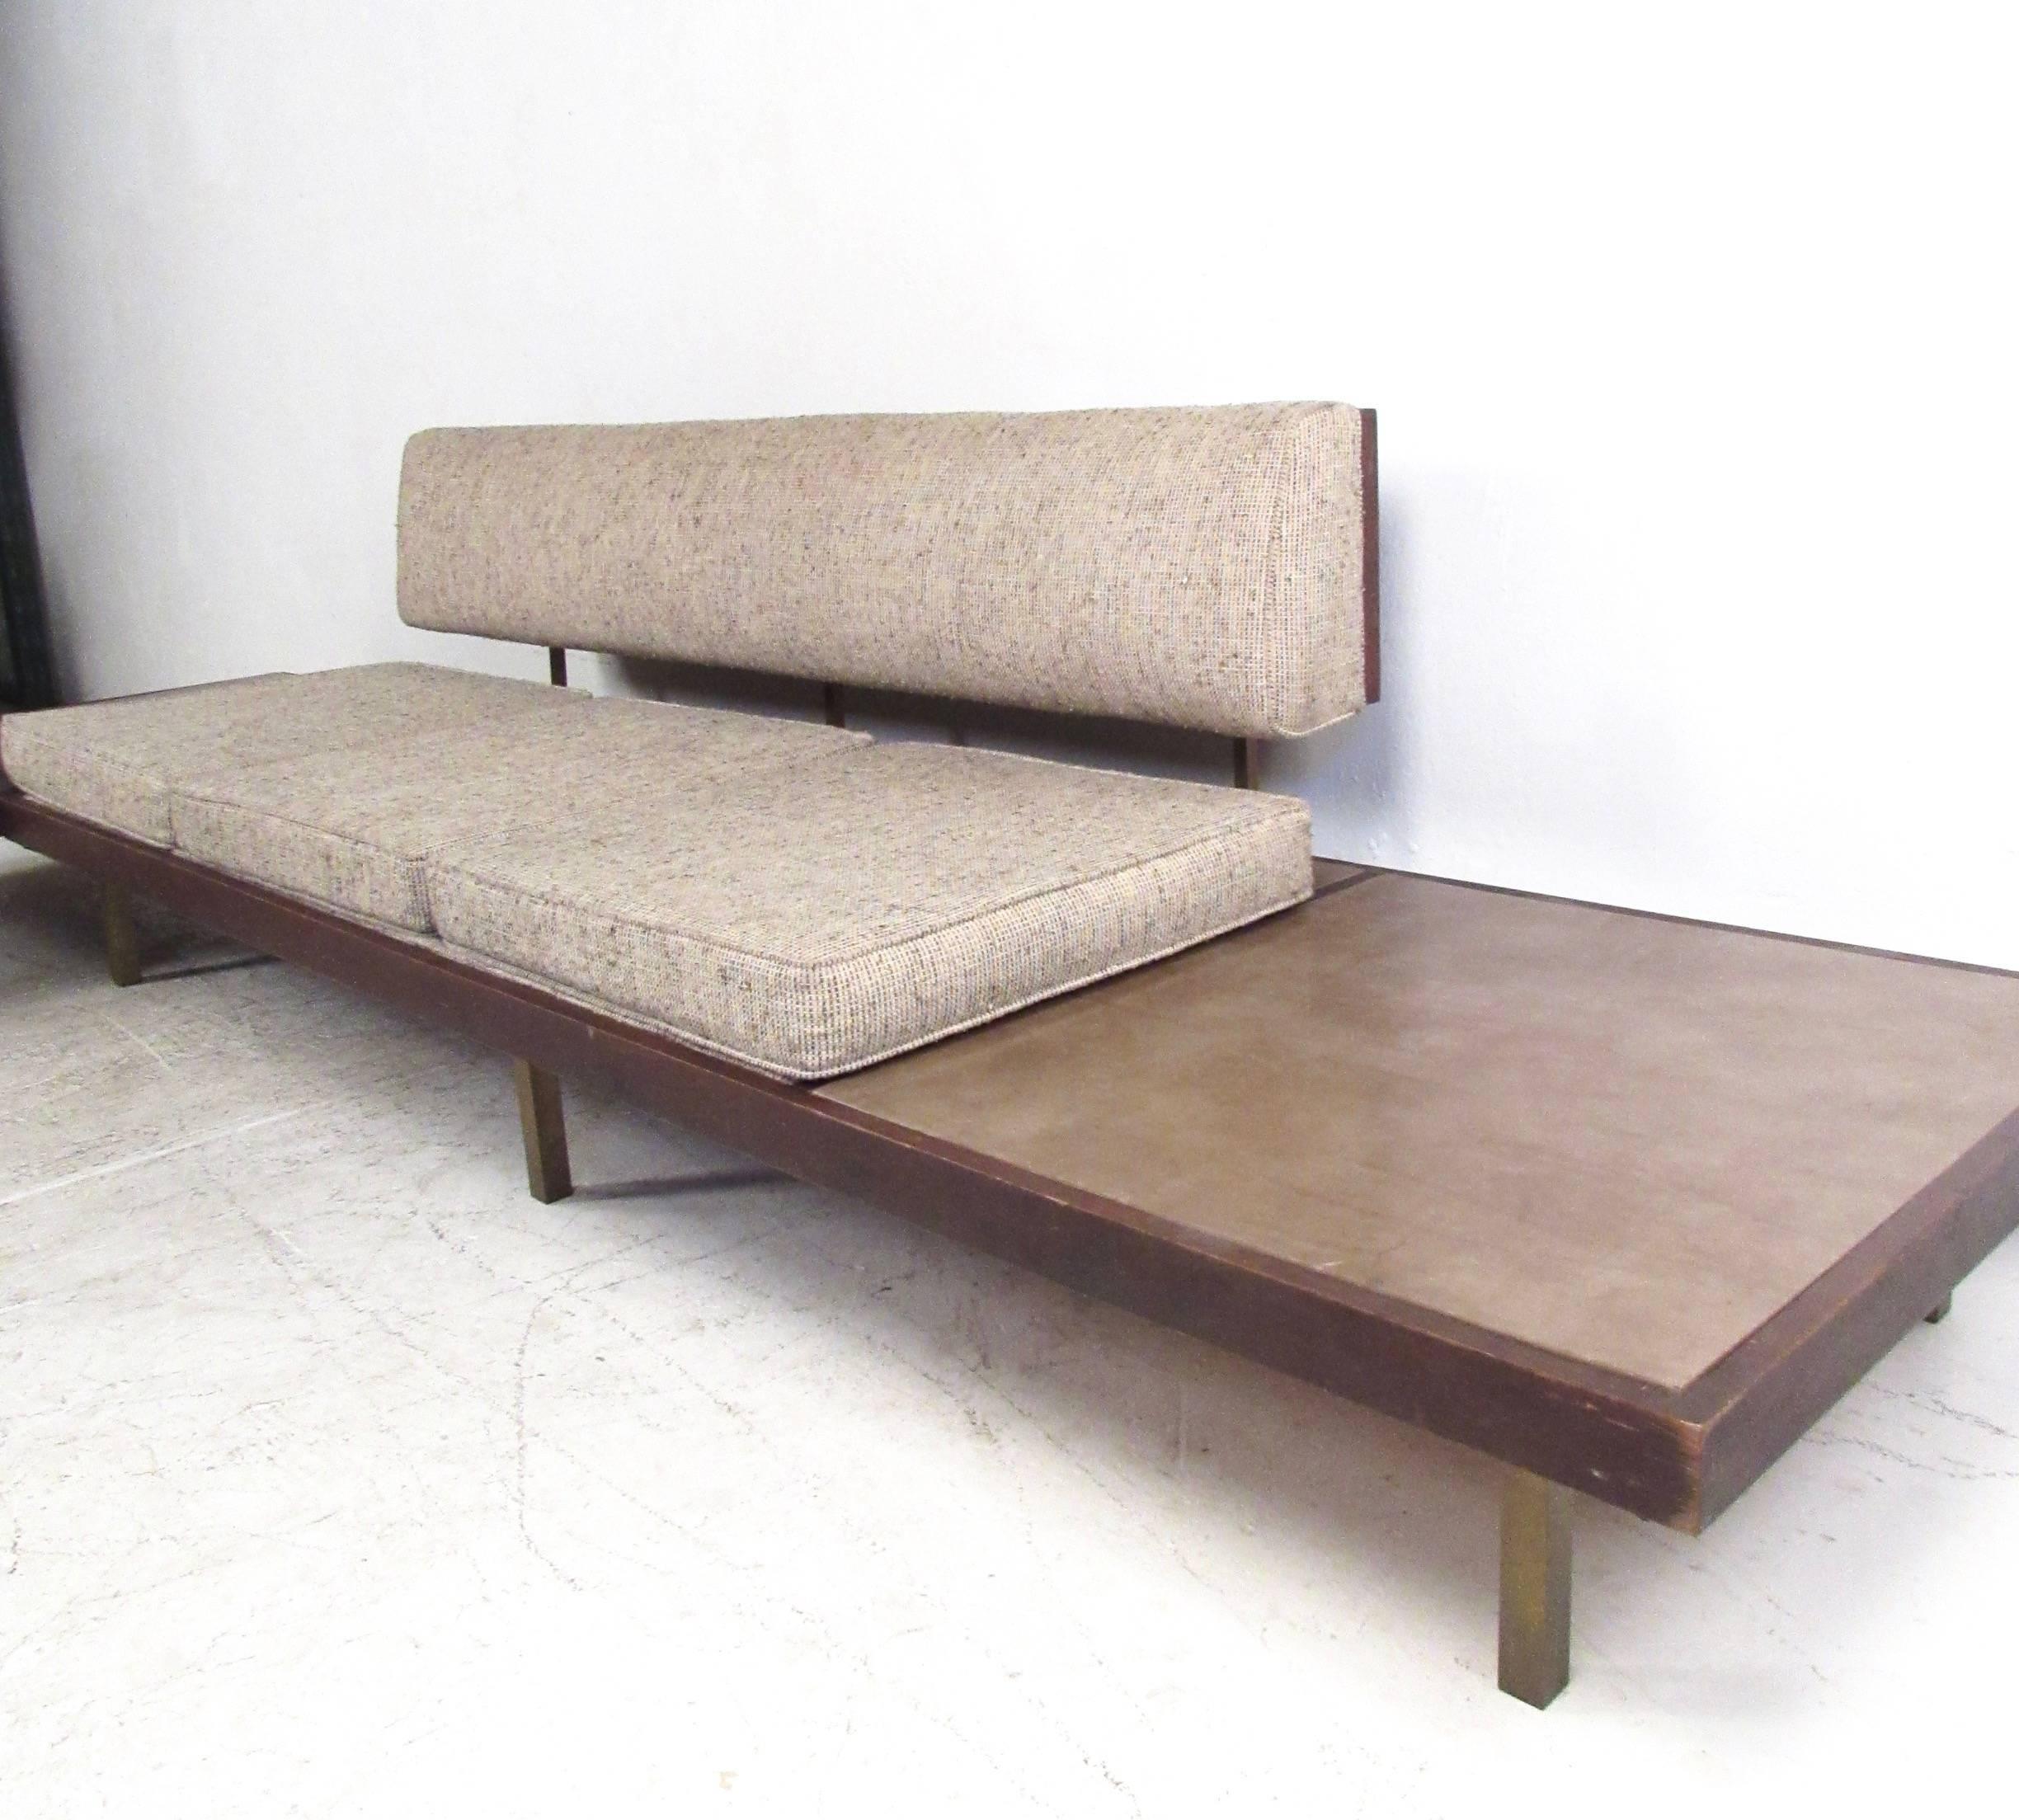 This unique matching pair of vintage sofa's features two and three-seat design, both with Naugahyde covered end tables. Unique cane and brass seat backs accentuate the vintage fabric while adding to the Classic Mid-Century style of the pair.